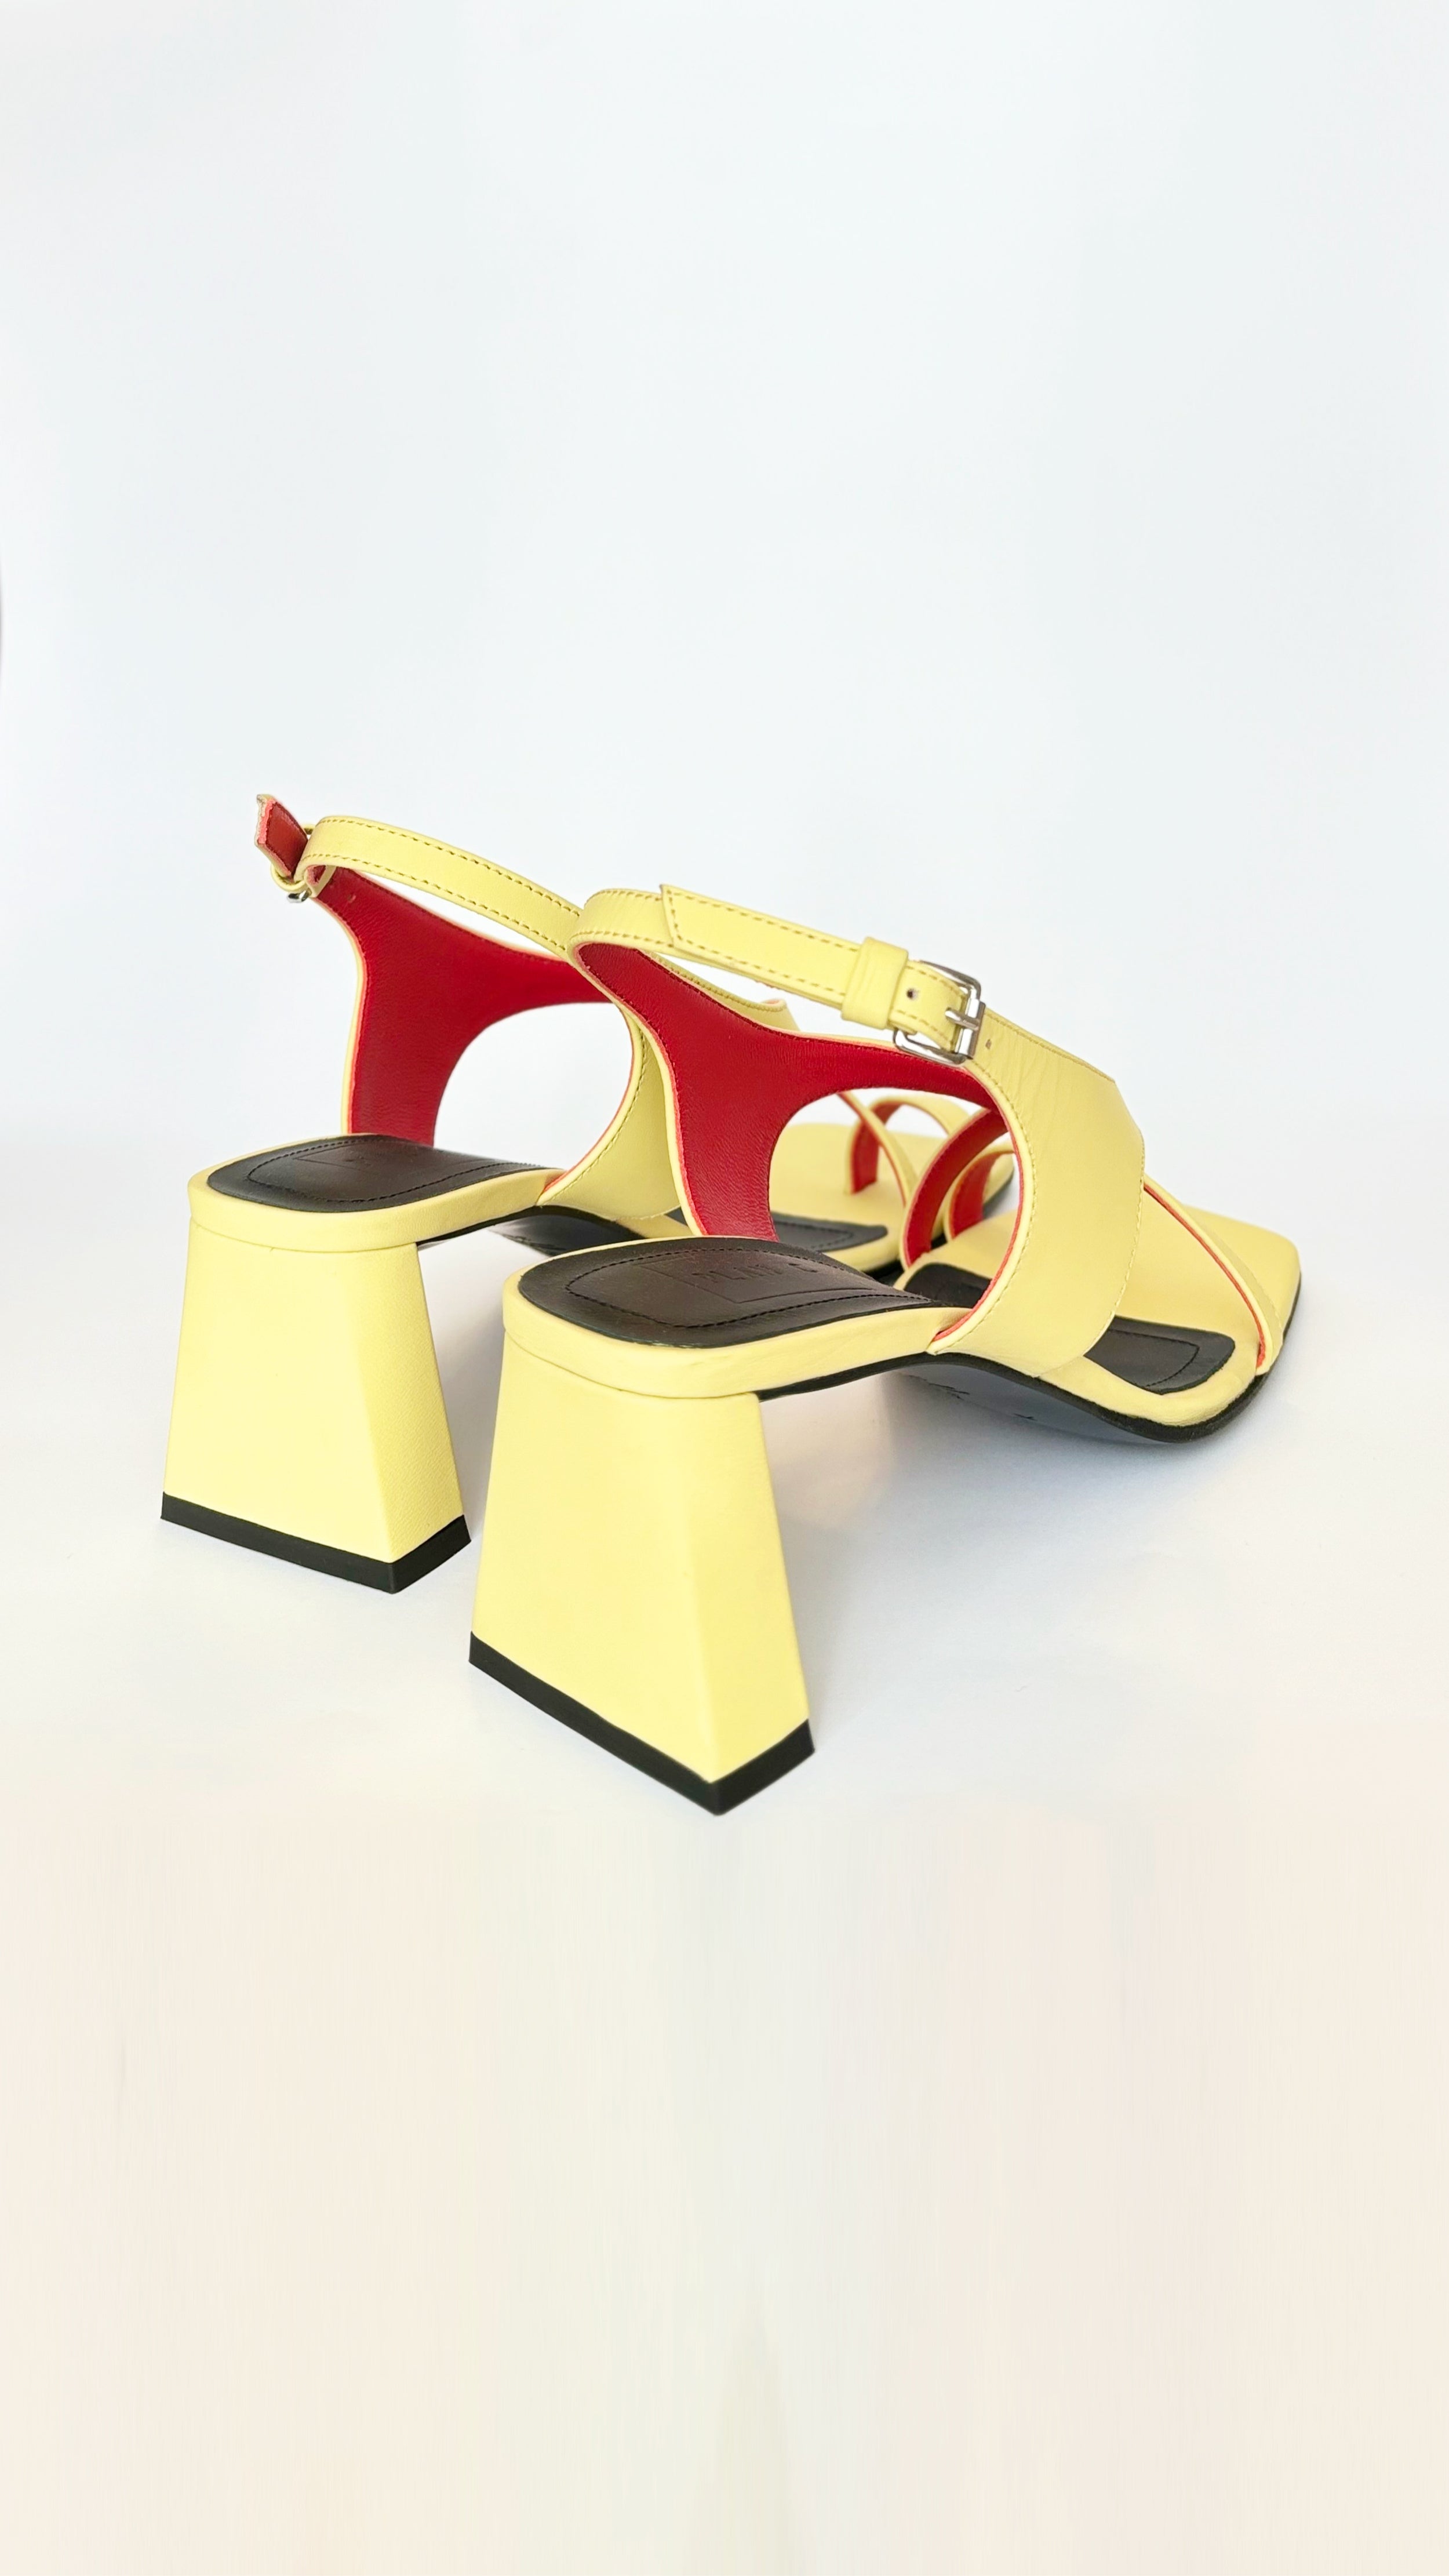 Plan C Crisscross Toe-Loop Slingback Sandals. In yellow leather exterior with a pop of red interior. It features one toe loop, open toe heeled sandal with a criss cross of leather acorss the top. Stack heel in the back. Pair shown facing back and side